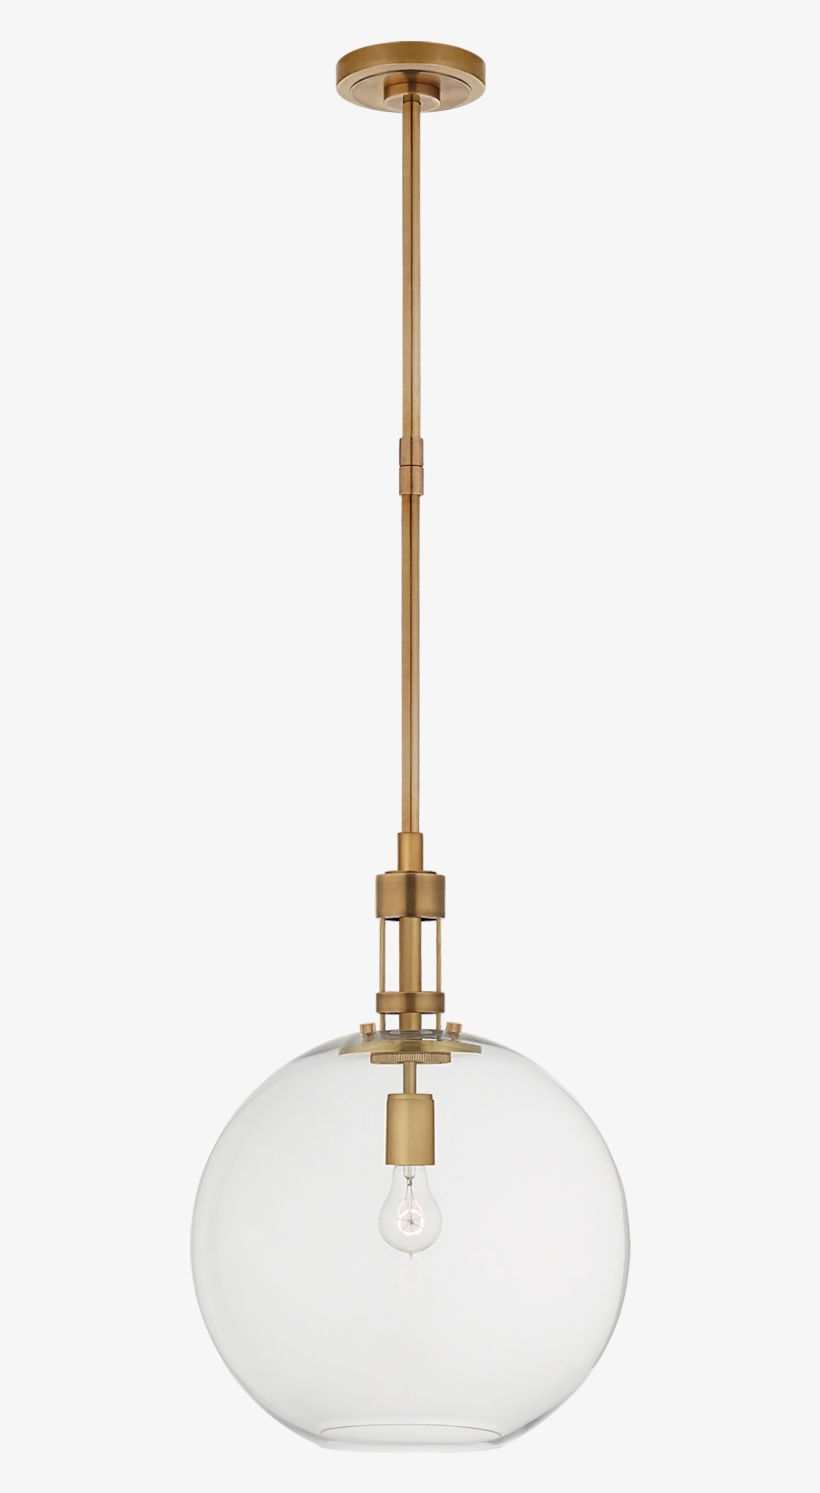 Gable Large Globe Pendant In Hand-rubbed Antique Brass - Visual Comfort Corporation Of America, transparent png #8530299